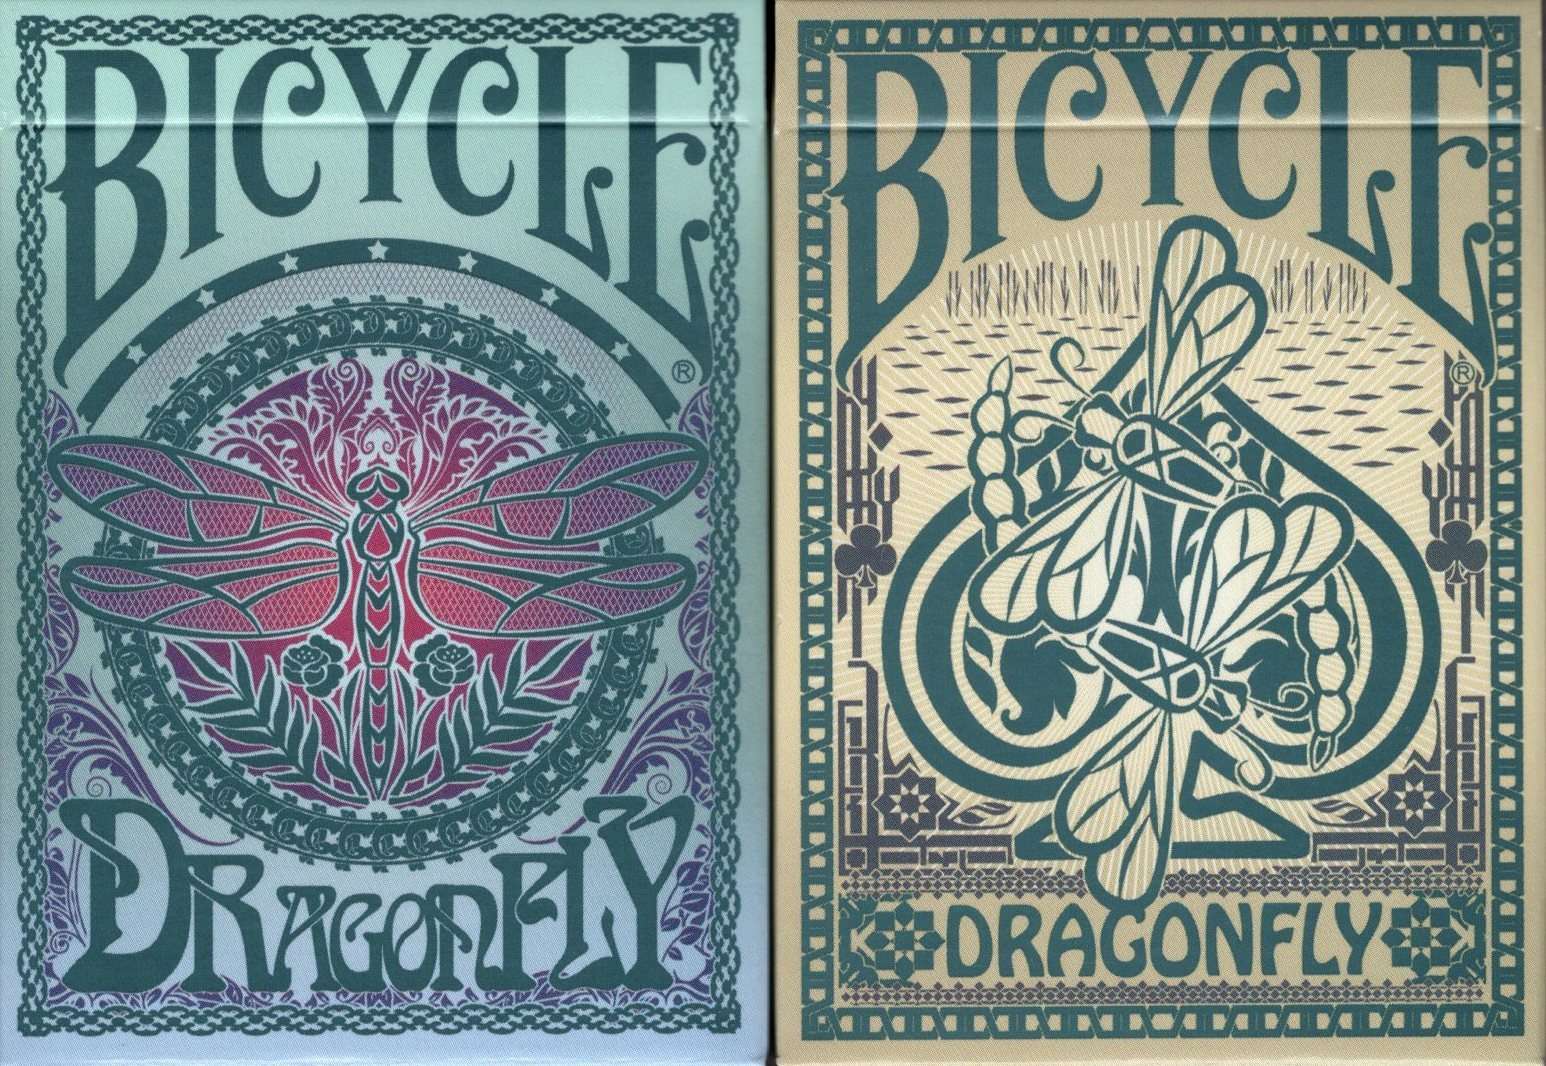 Dragonfly Bicycle Playing Cards